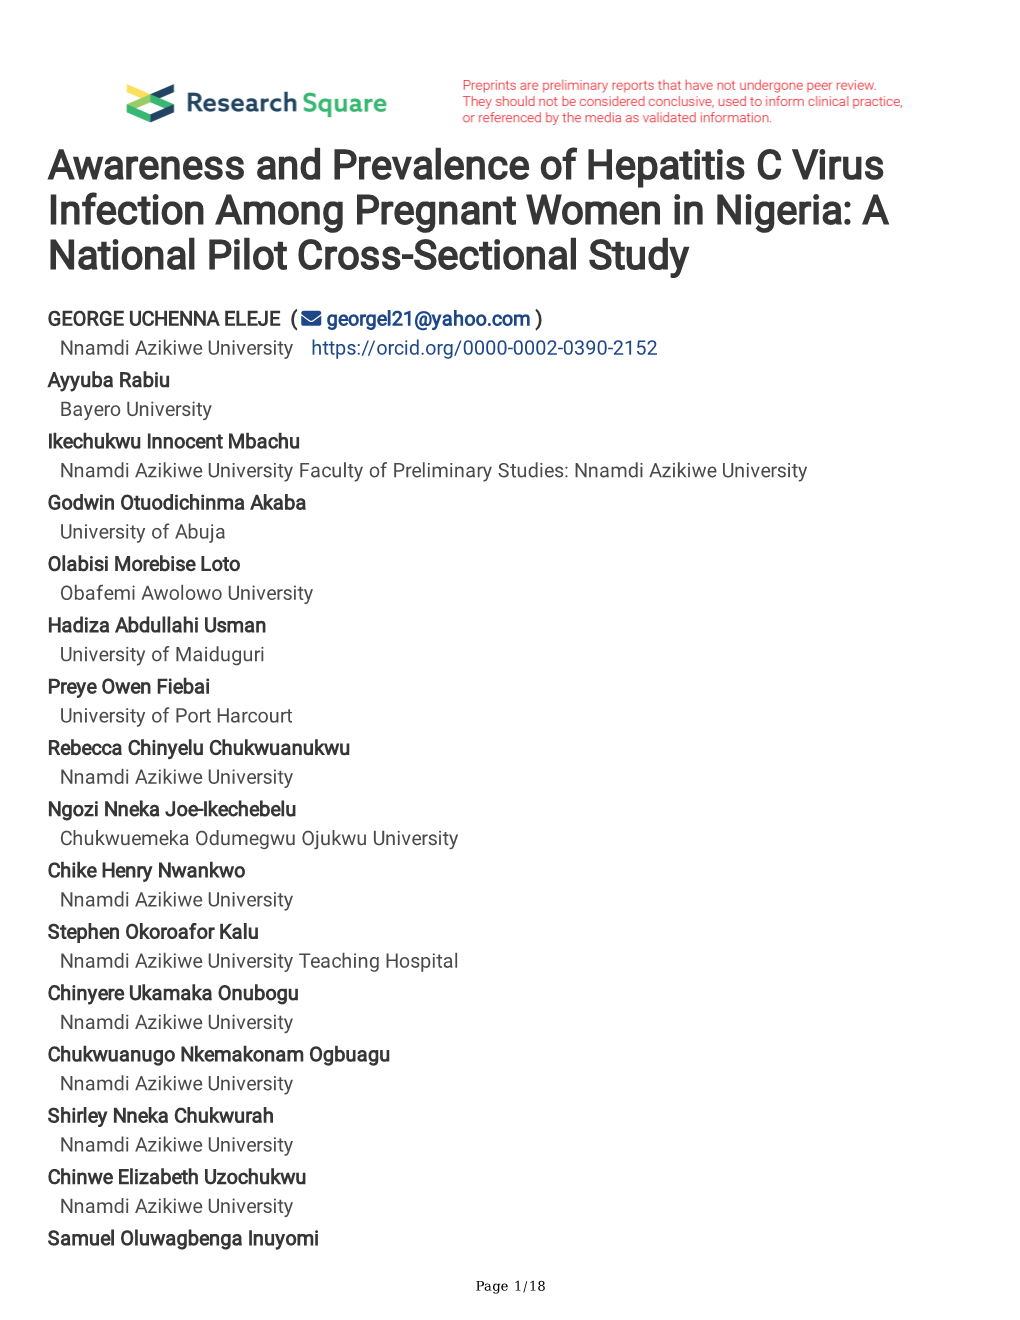 Awareness and Prevalence of Hepatitis C Virus Infection Among Pregnant Women in Nigeria: a National Pilot Cross-Sectional Study